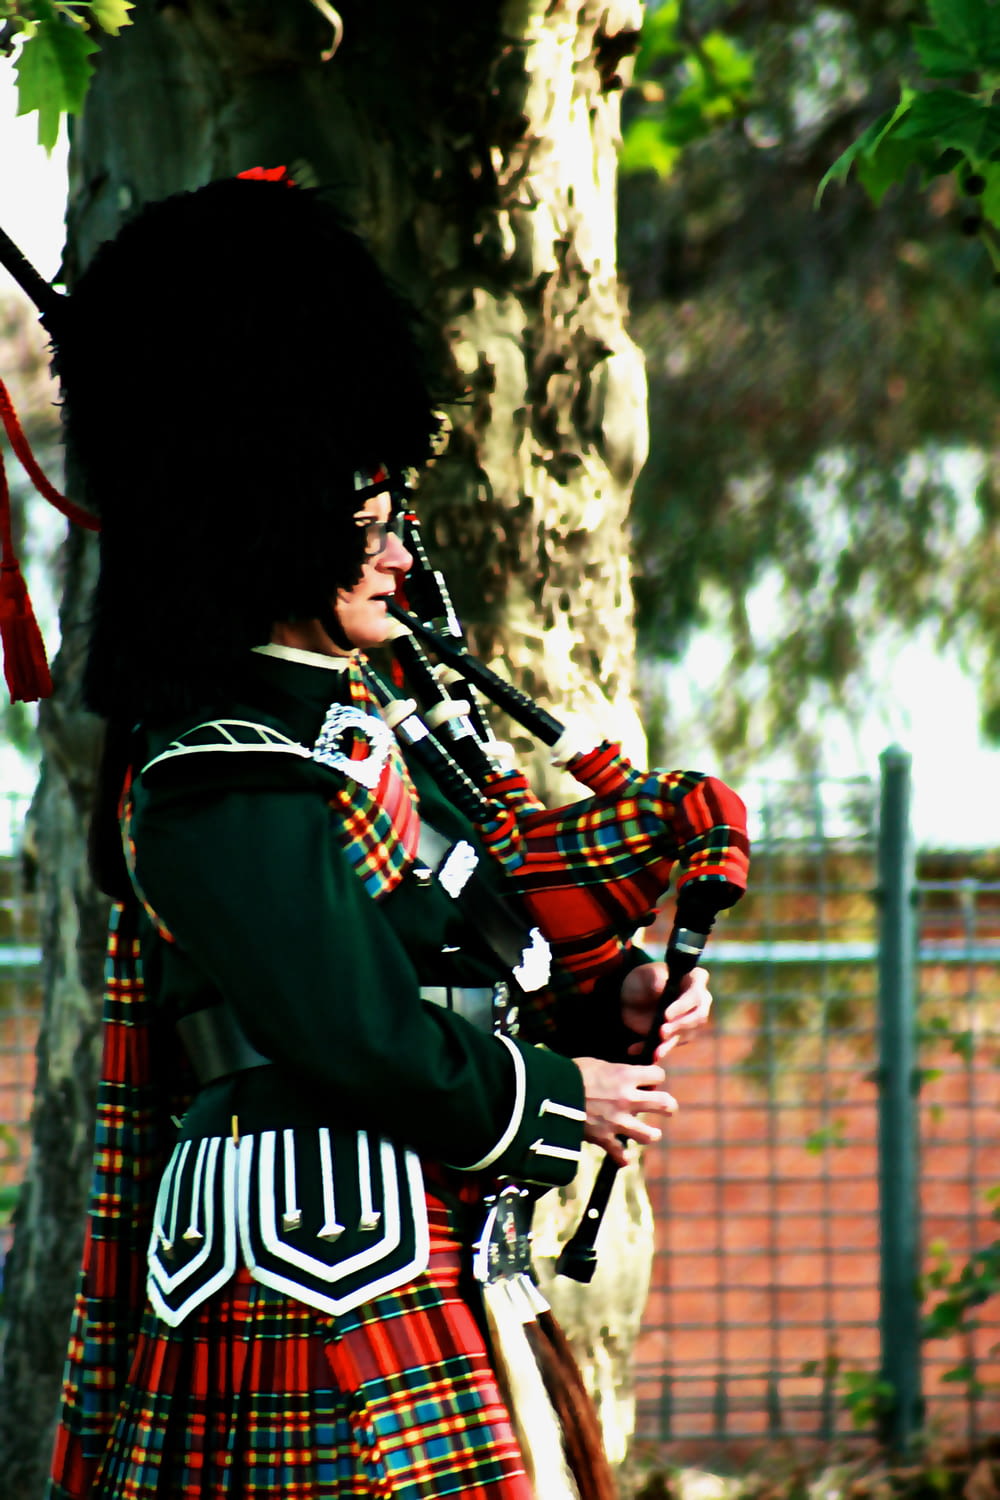 a man in a kilt playing a bagpipe